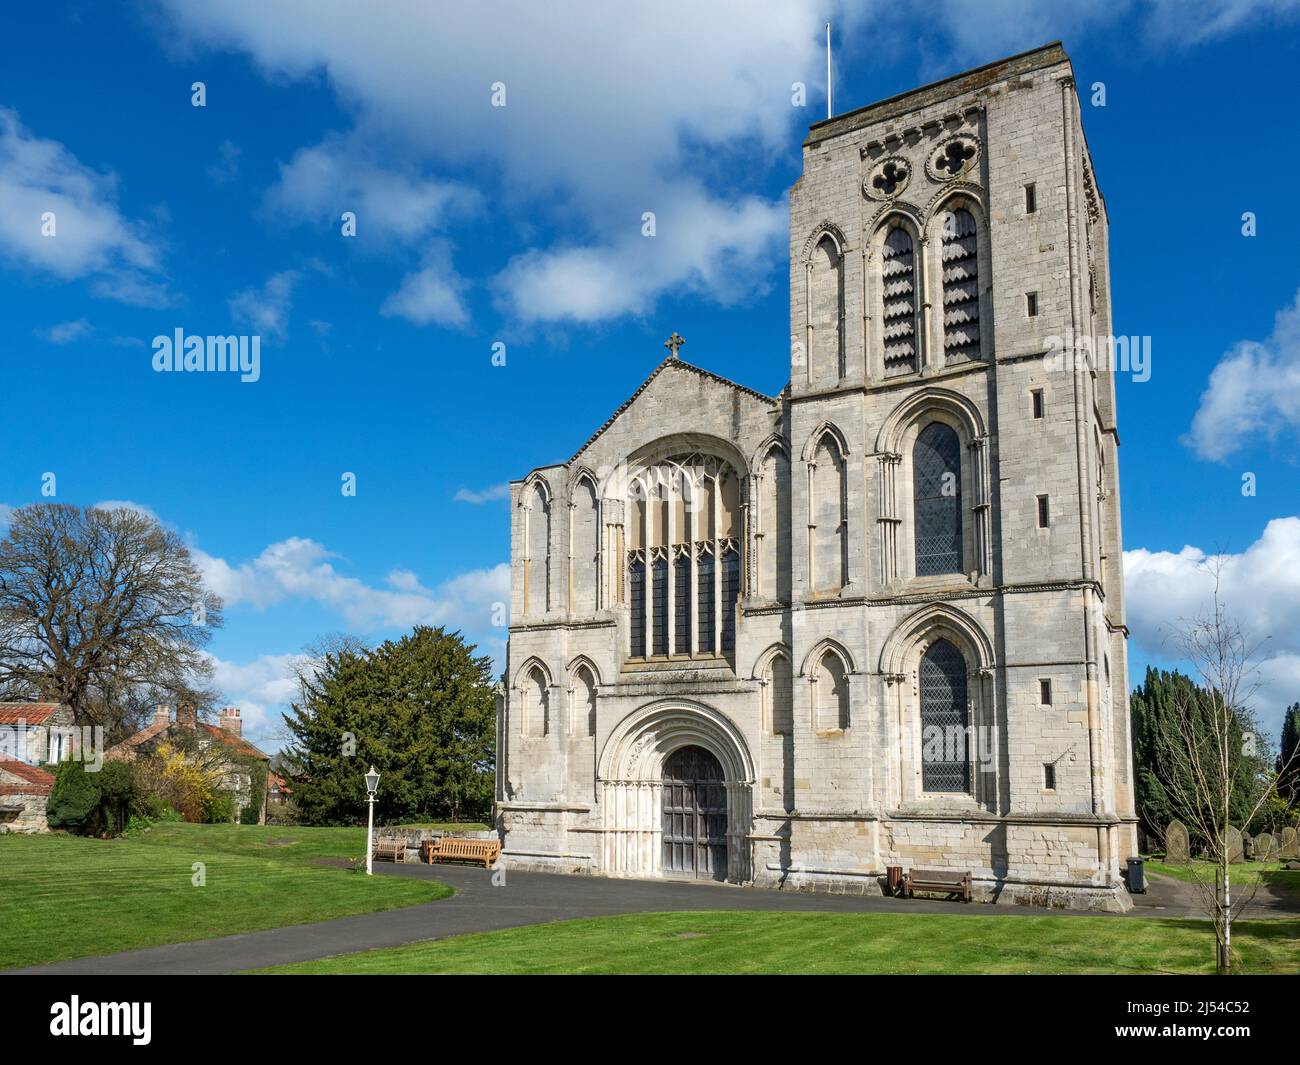 Priory Church of St Mary a grade I listed building in Old Malton near Malton North Yorkshire England Stock Photo